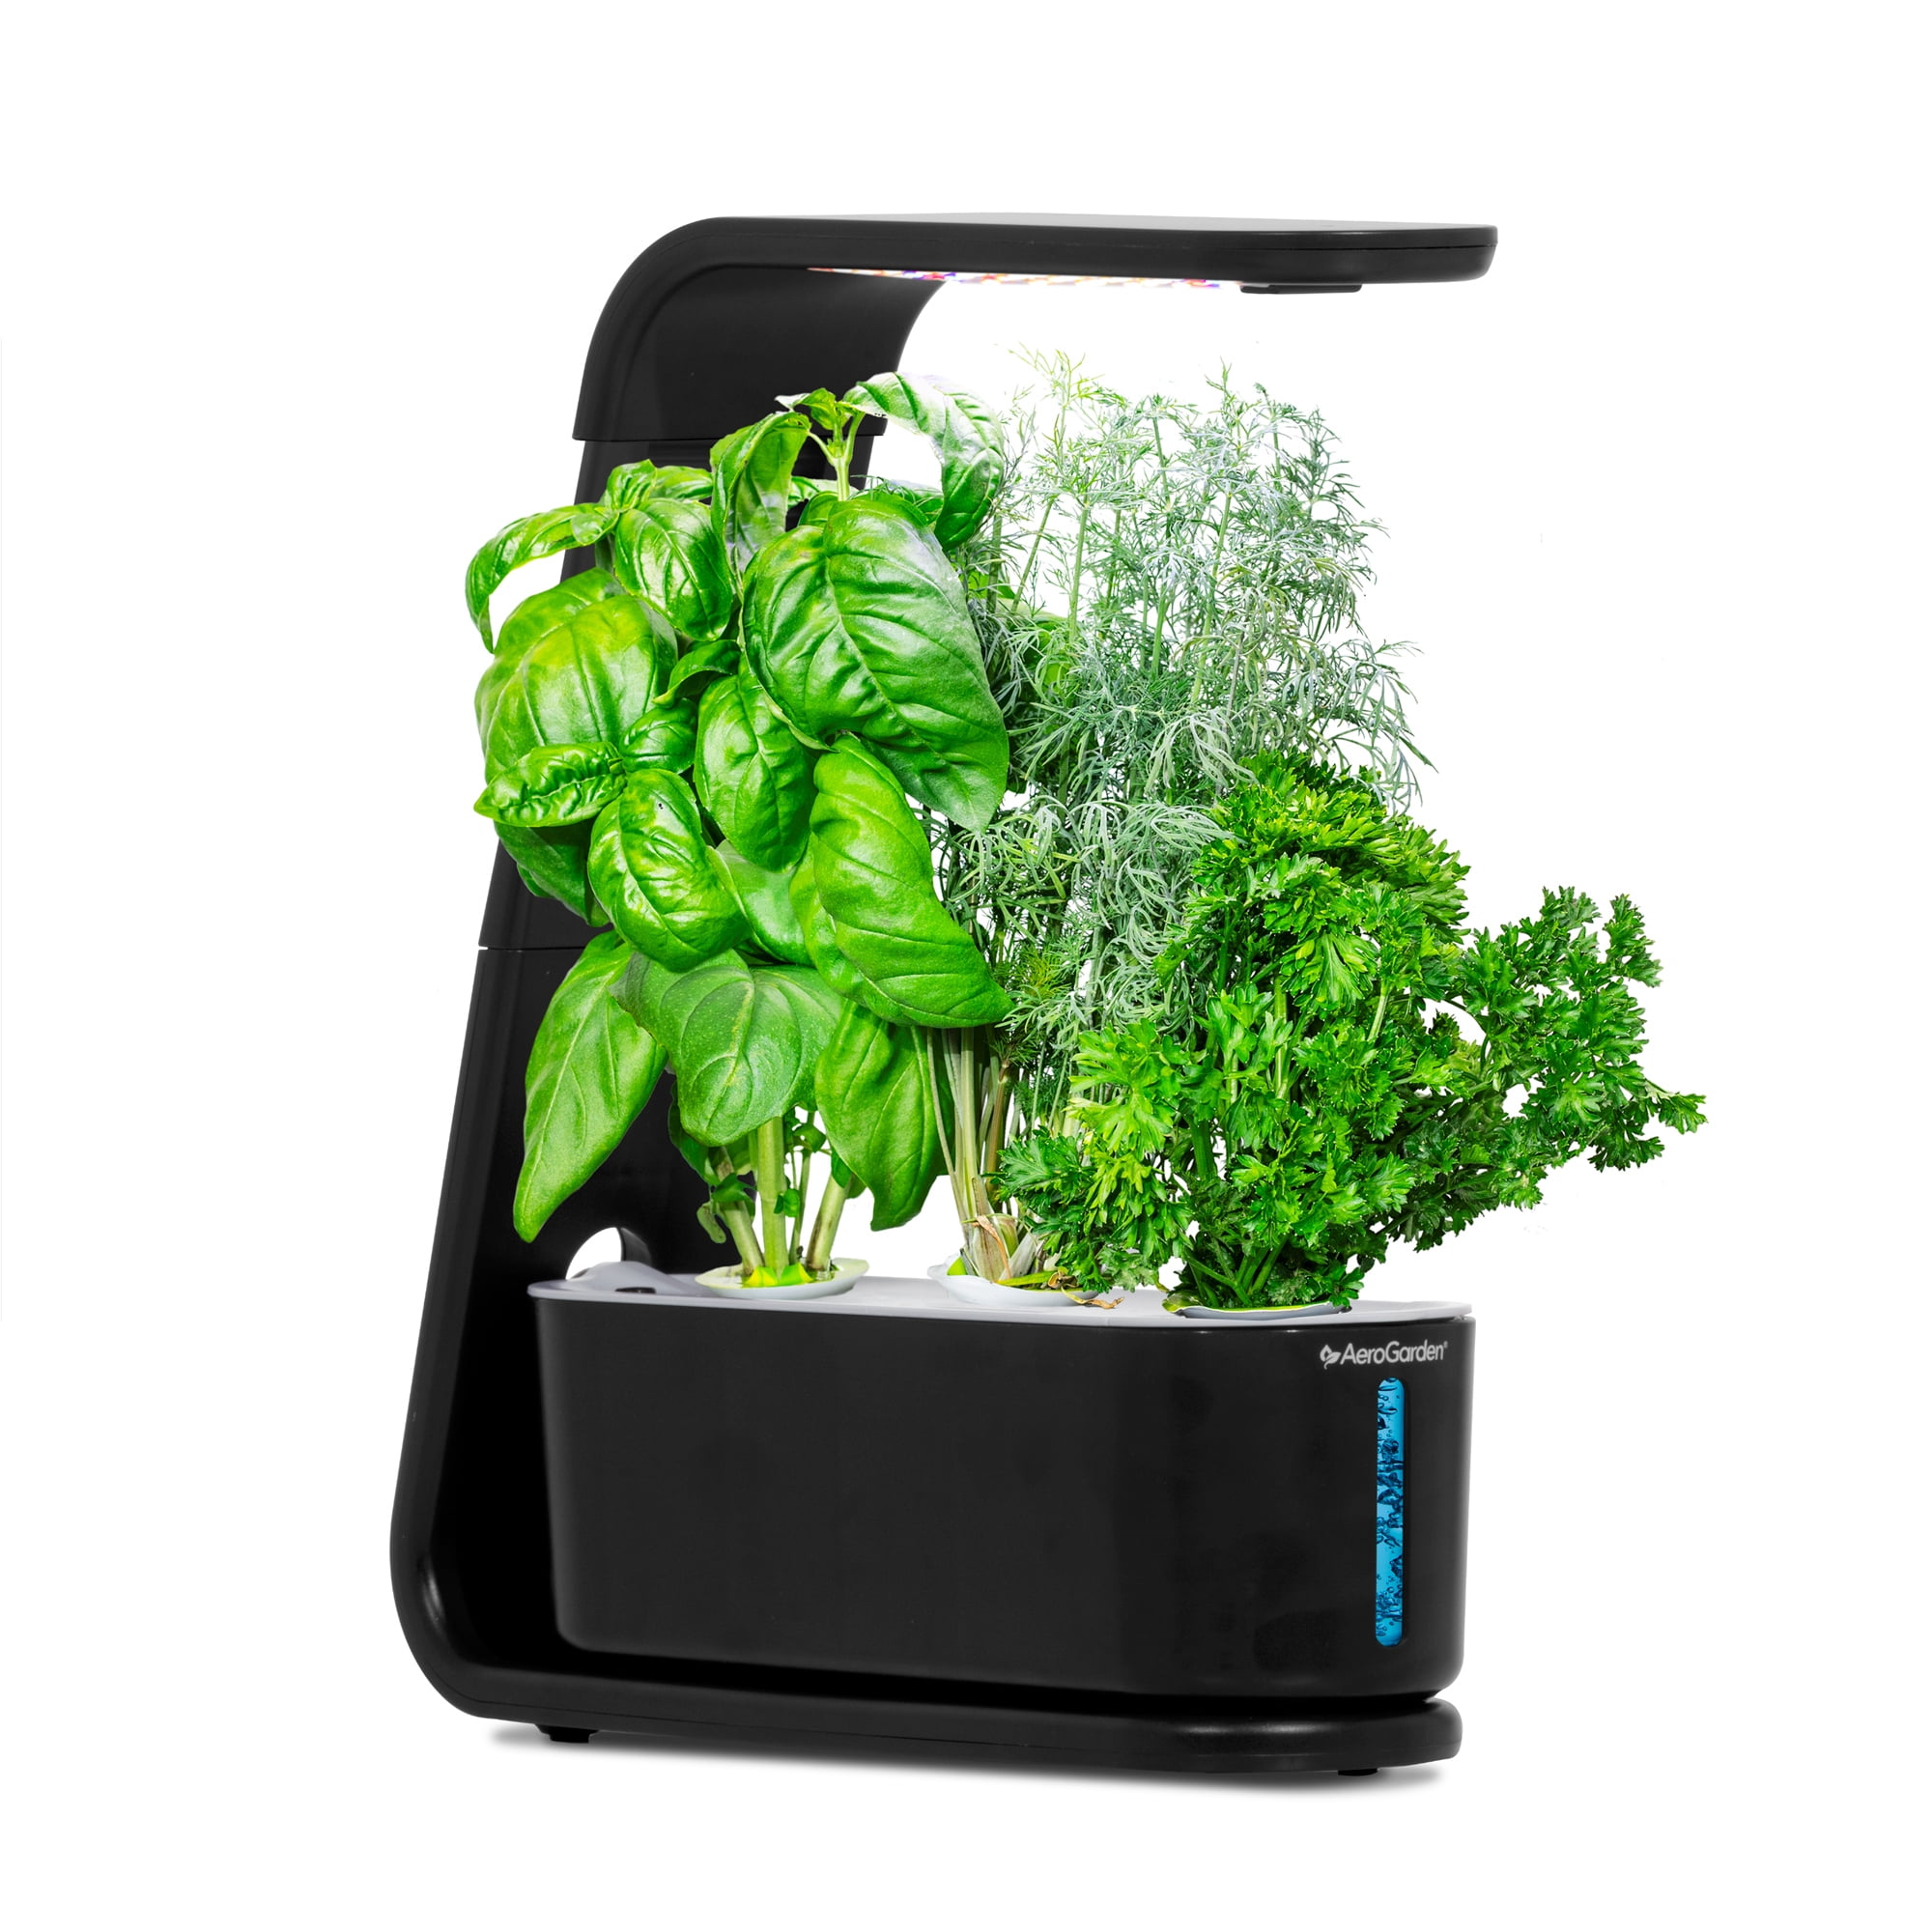 Hydroponic Start Seed Grow For LED Light System Stand Indoor Garden Details about   AeroGarden 